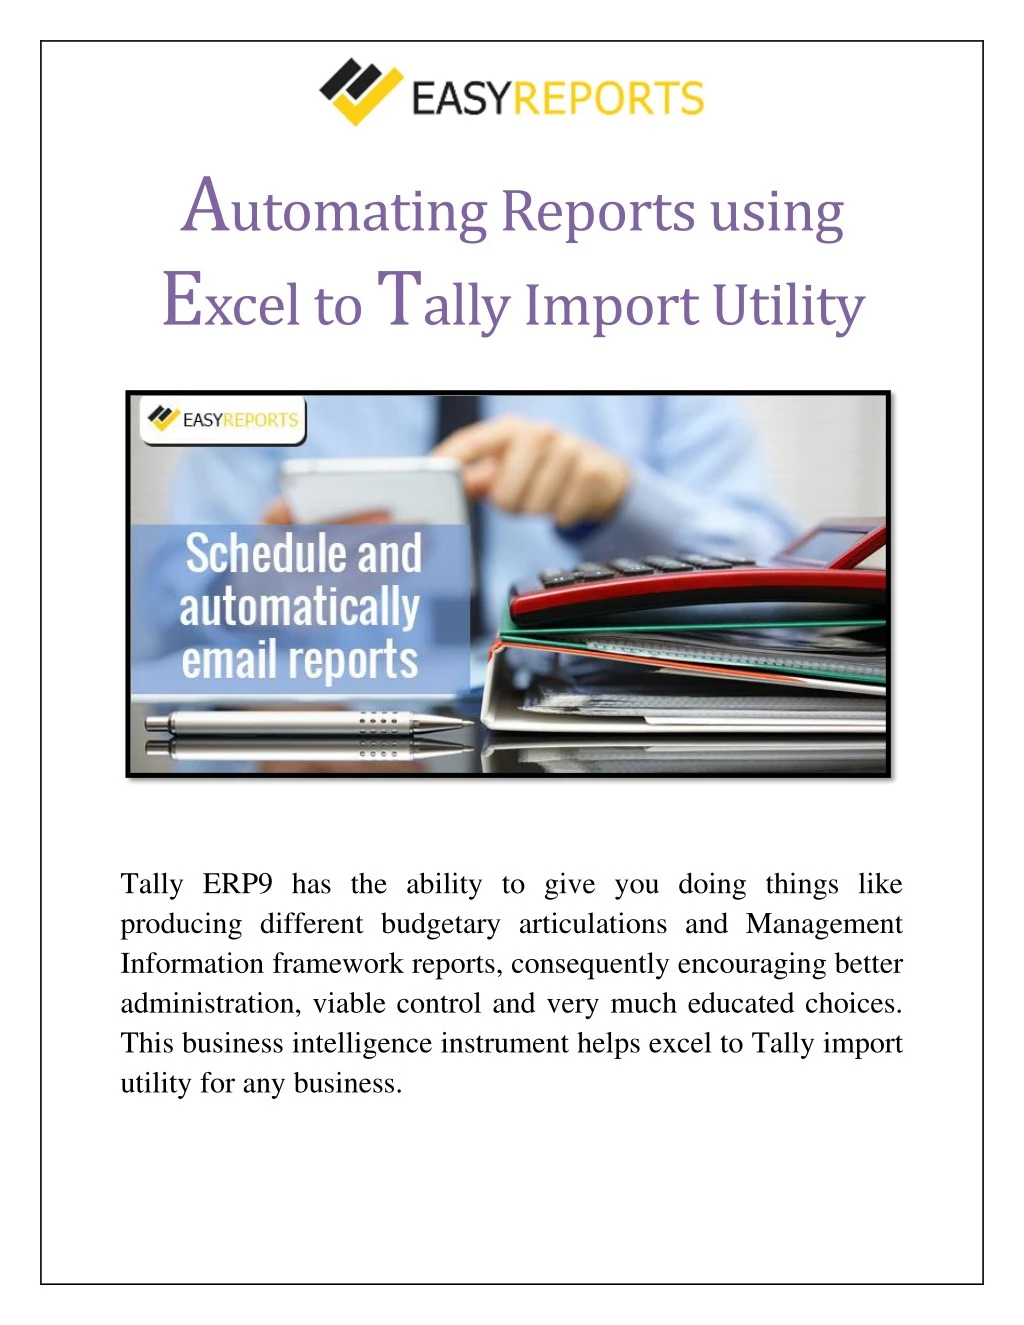 a utomating reports using e xcel to t ally import